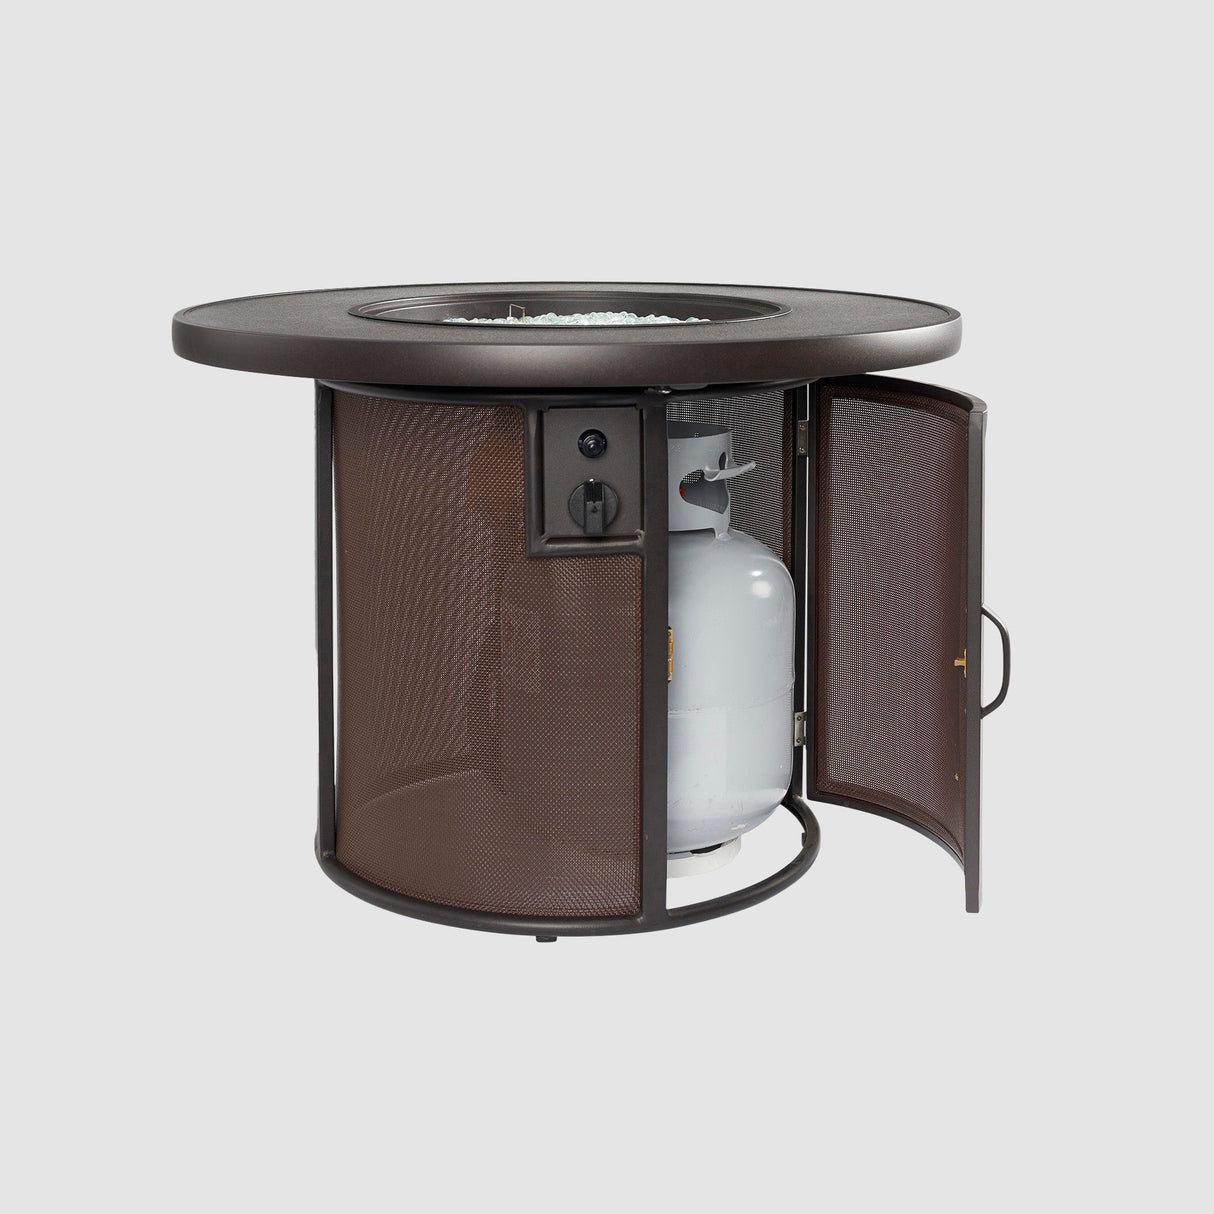 The side access door open on a Brown Stonefire Round Gas Fire Pit Table